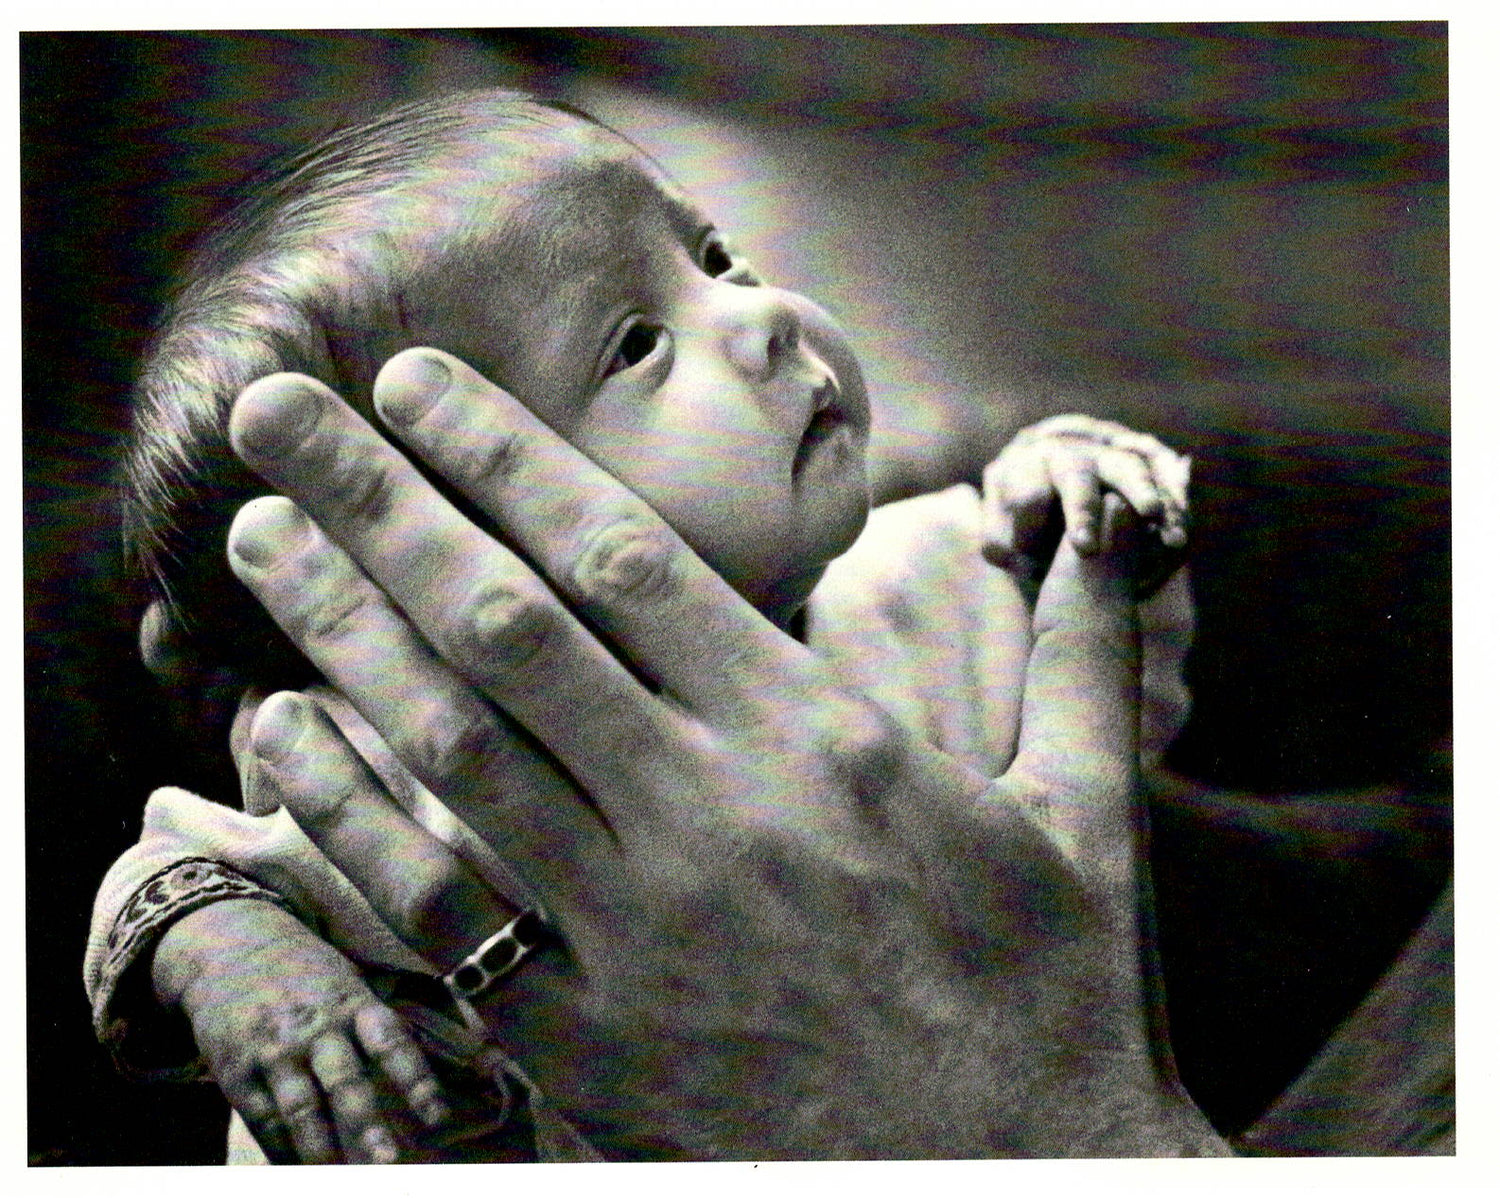 HAND FULL OF HOPE - SUZANNE ARMS SMALL POSTCARD